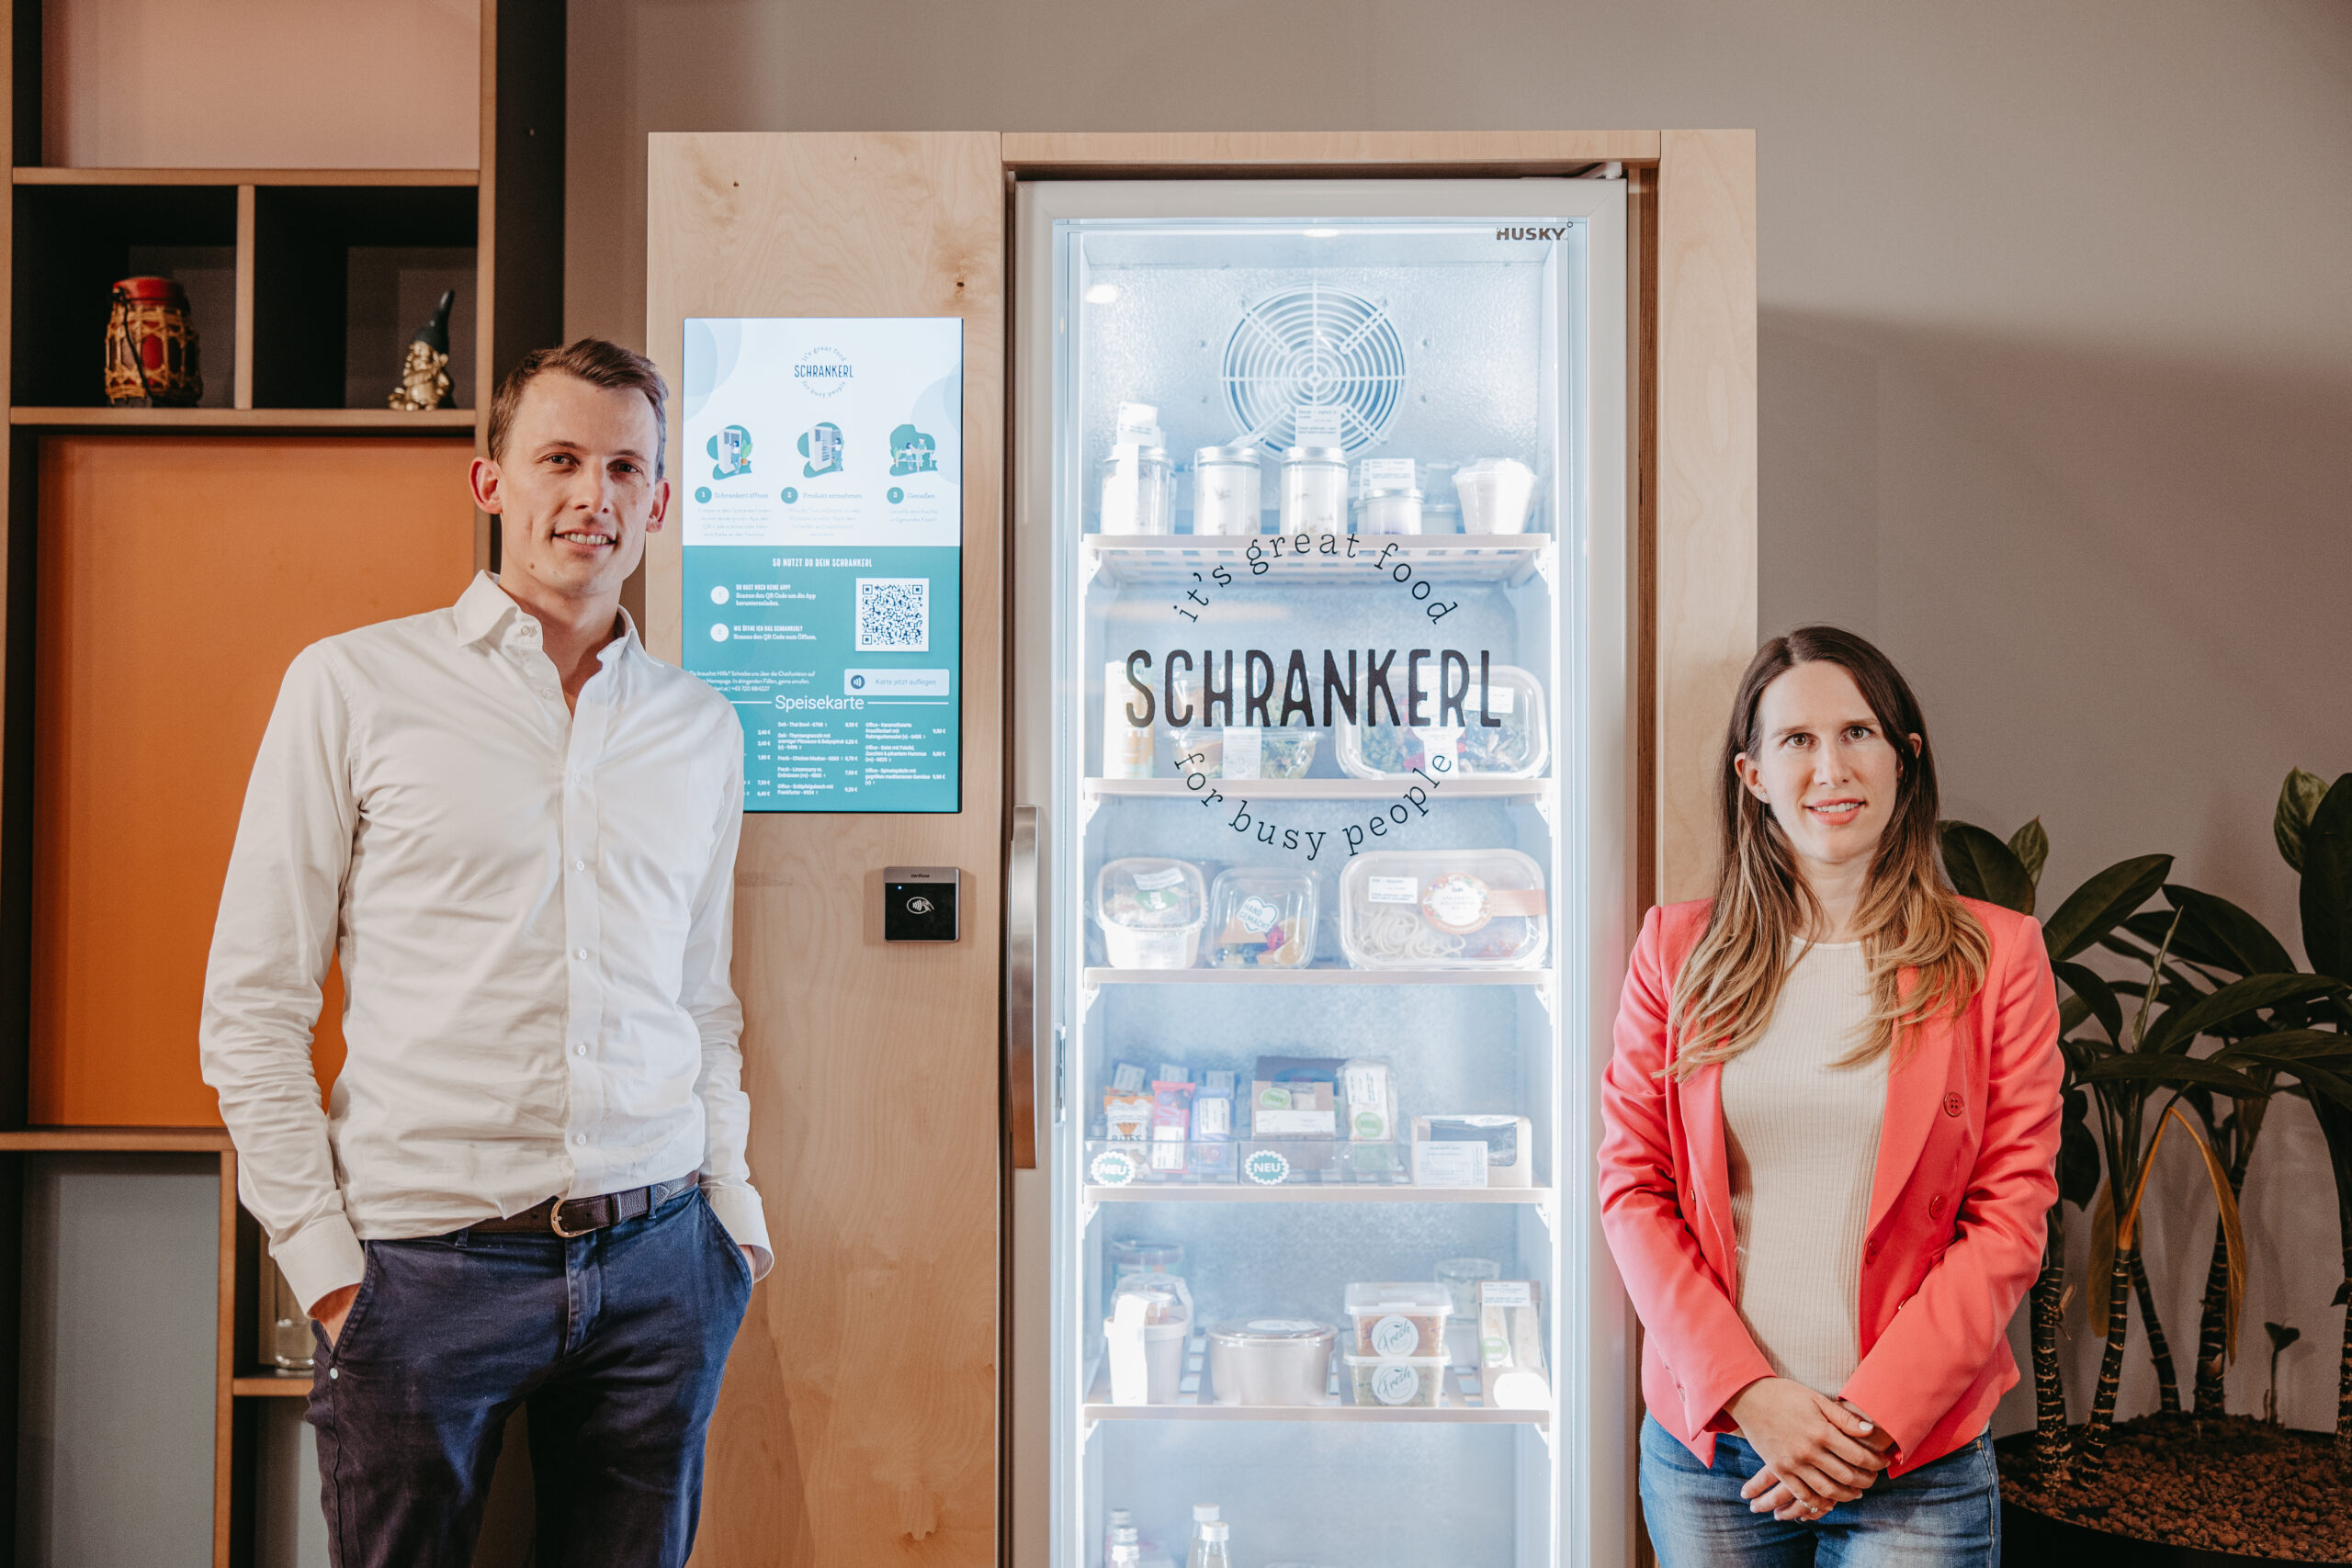 New Food for New Work: Schrankerl offers the most innovative way how we eat at the office by bringing a new form of lunch culture to companies